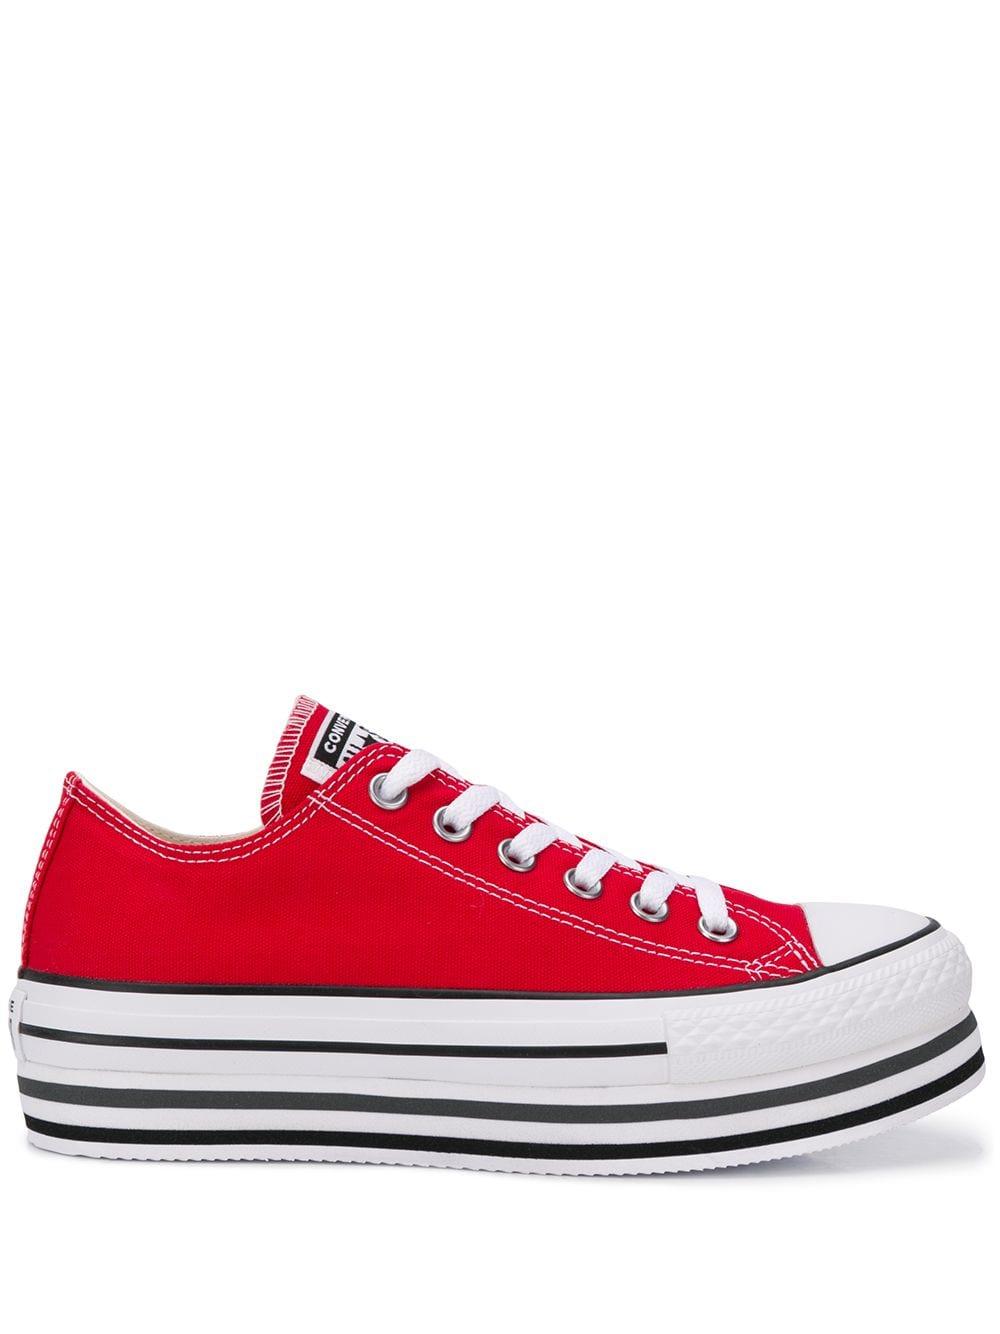 Converse Platform All-star Sneakers in Red | Lyst